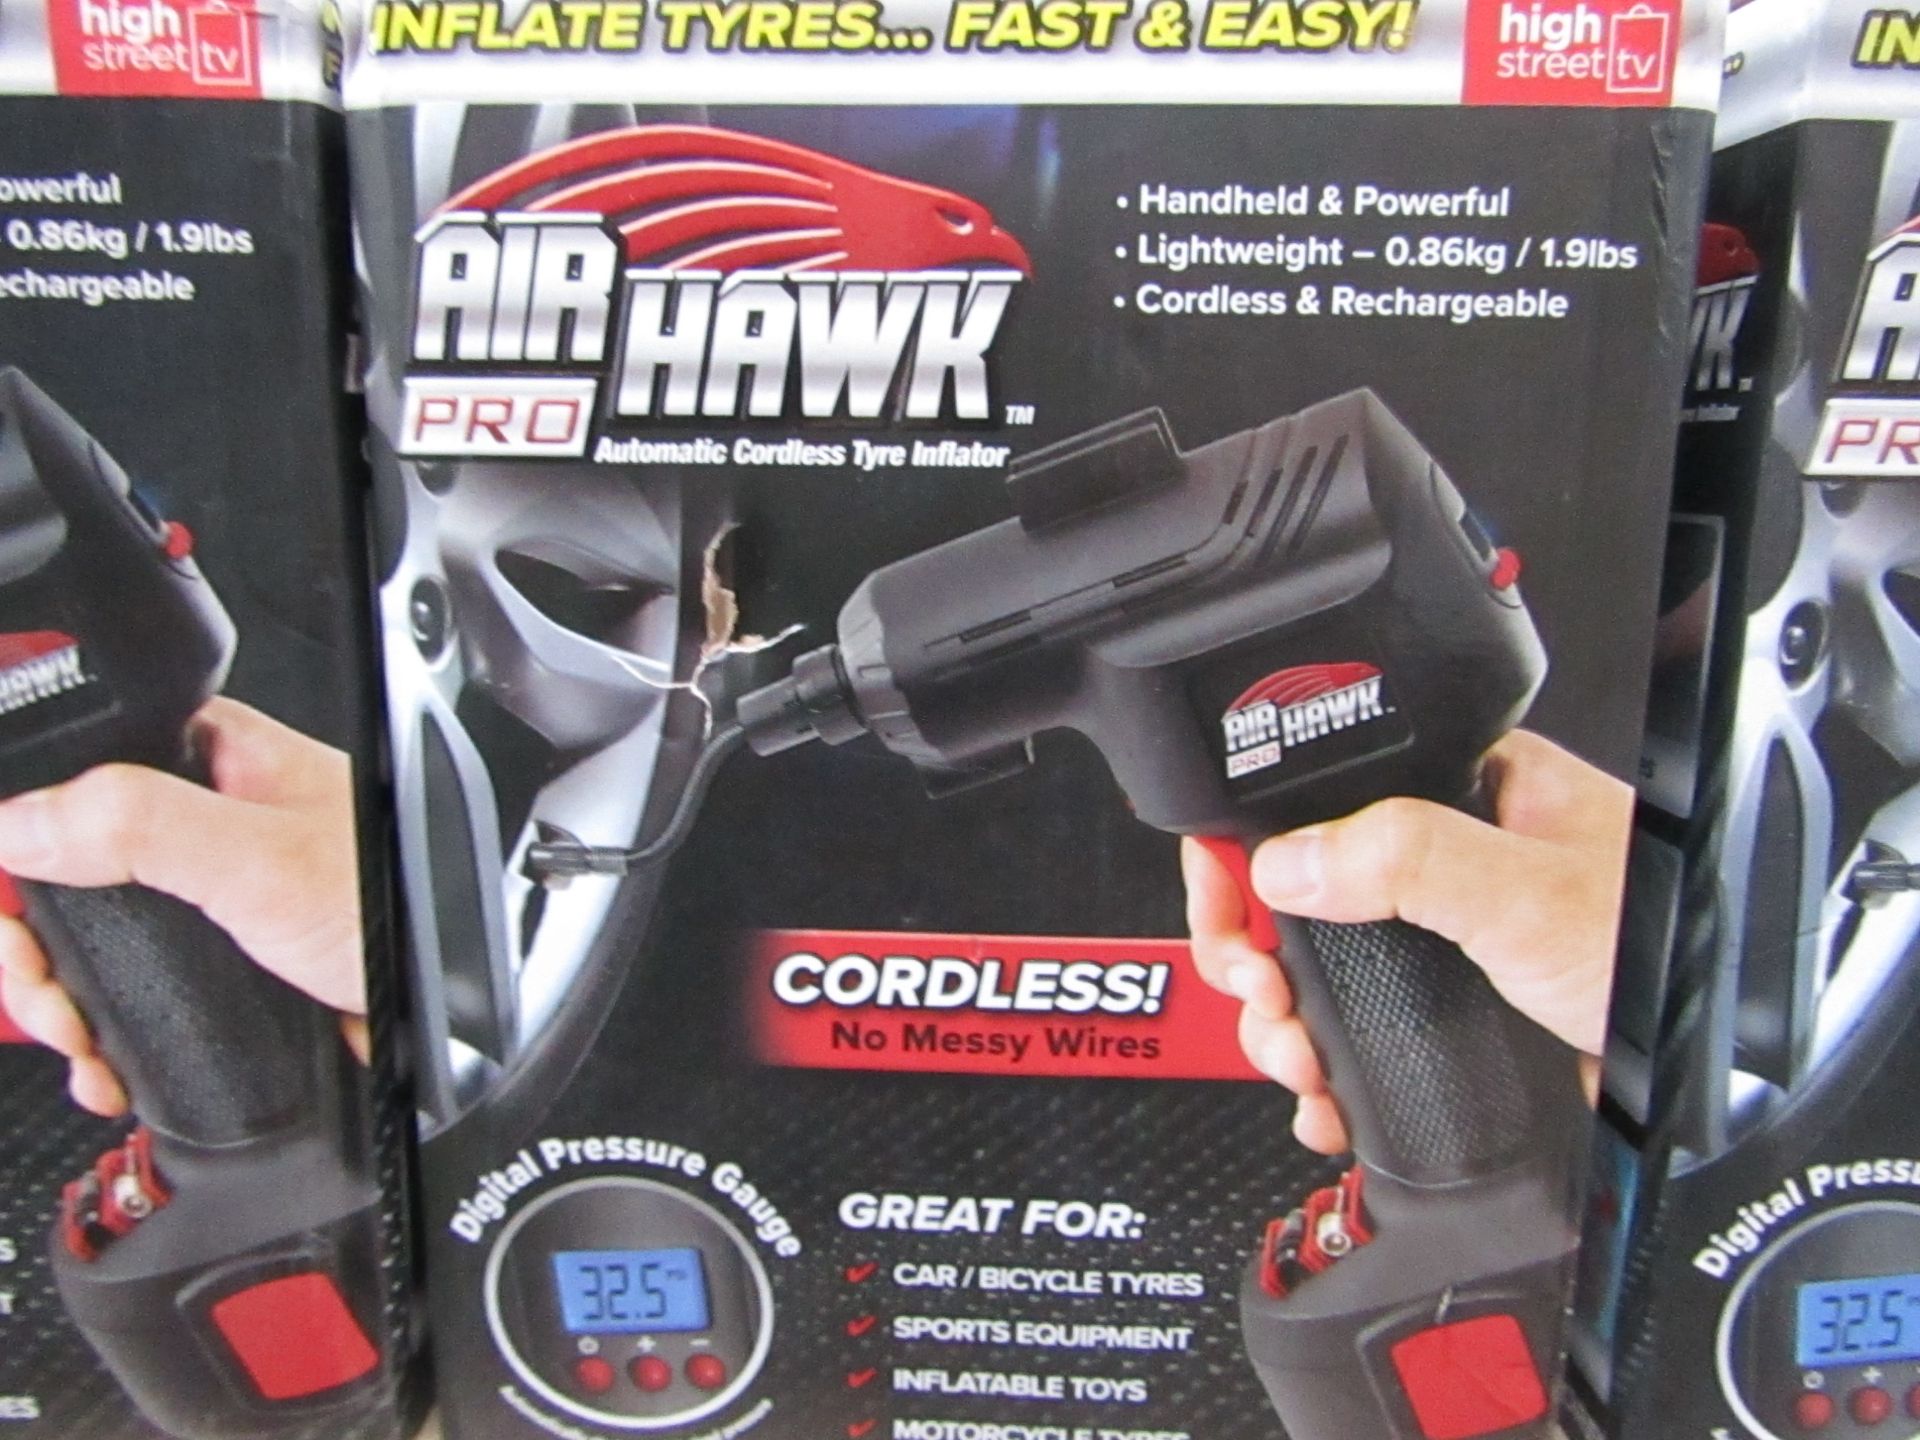 | 1x | Air Hawk Pro compressor | tested working and boxed | no online re-sale | Sku C5060191466837 |